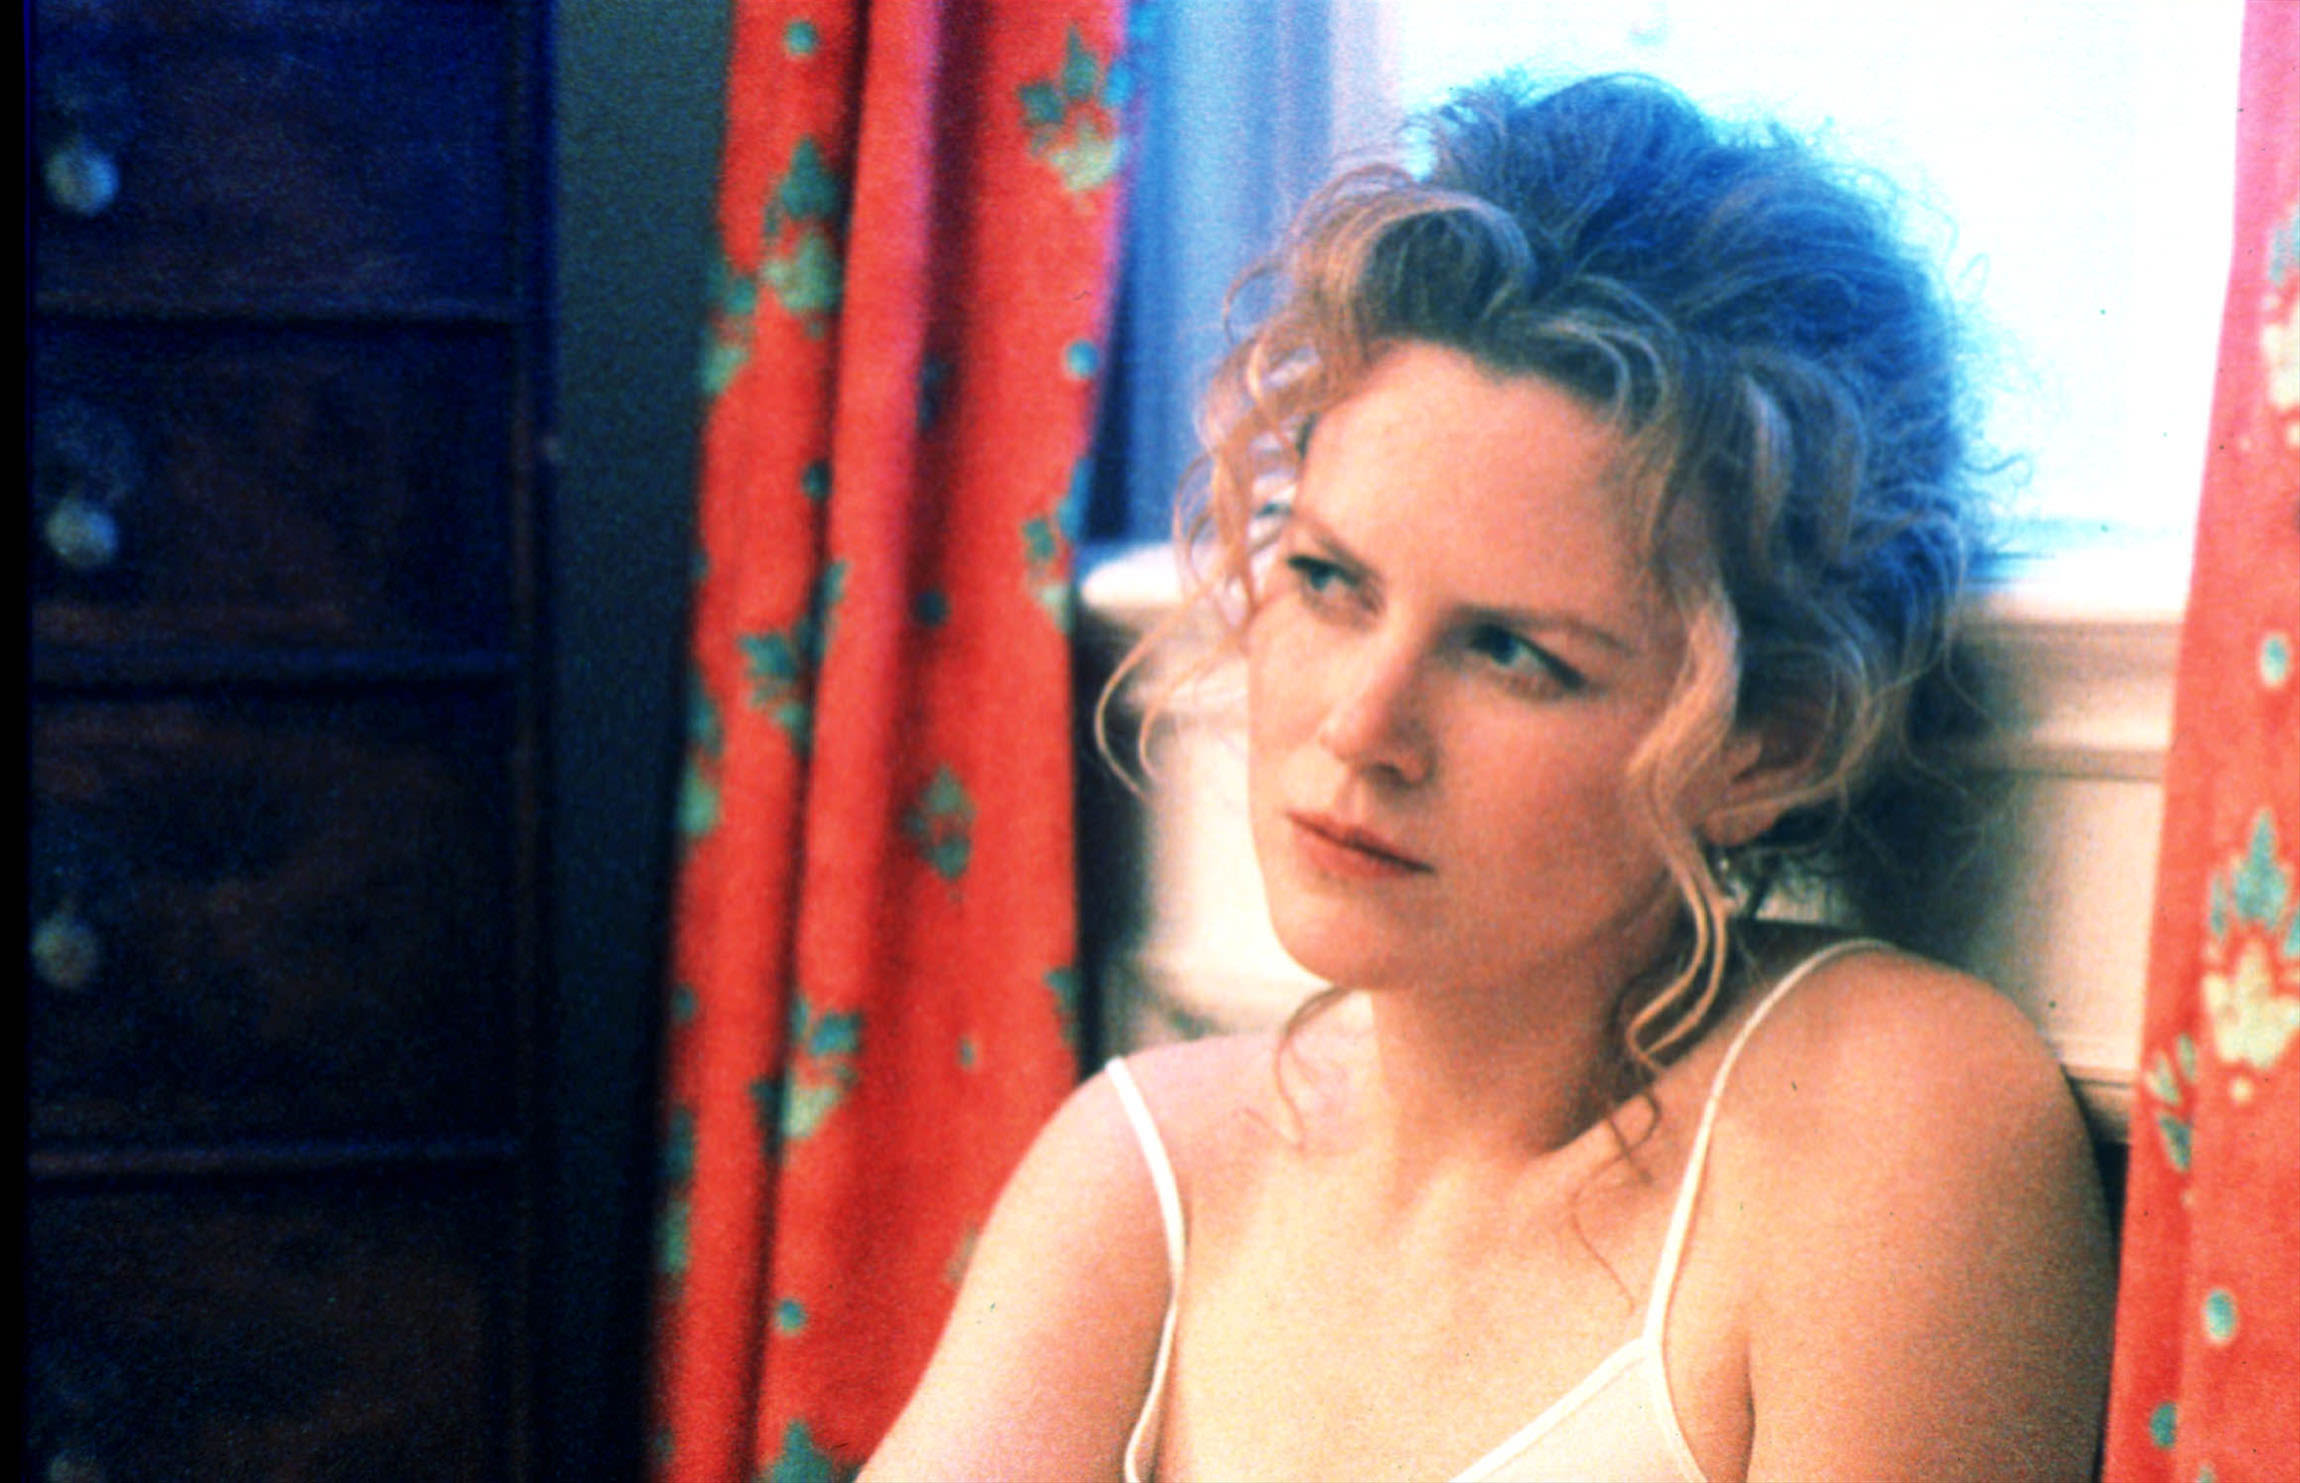 Nicole Kidman Reveals Stanley Kubrick’s Rules for Actors During ‘Eyes Wide Shut’ on 25th Anniversary